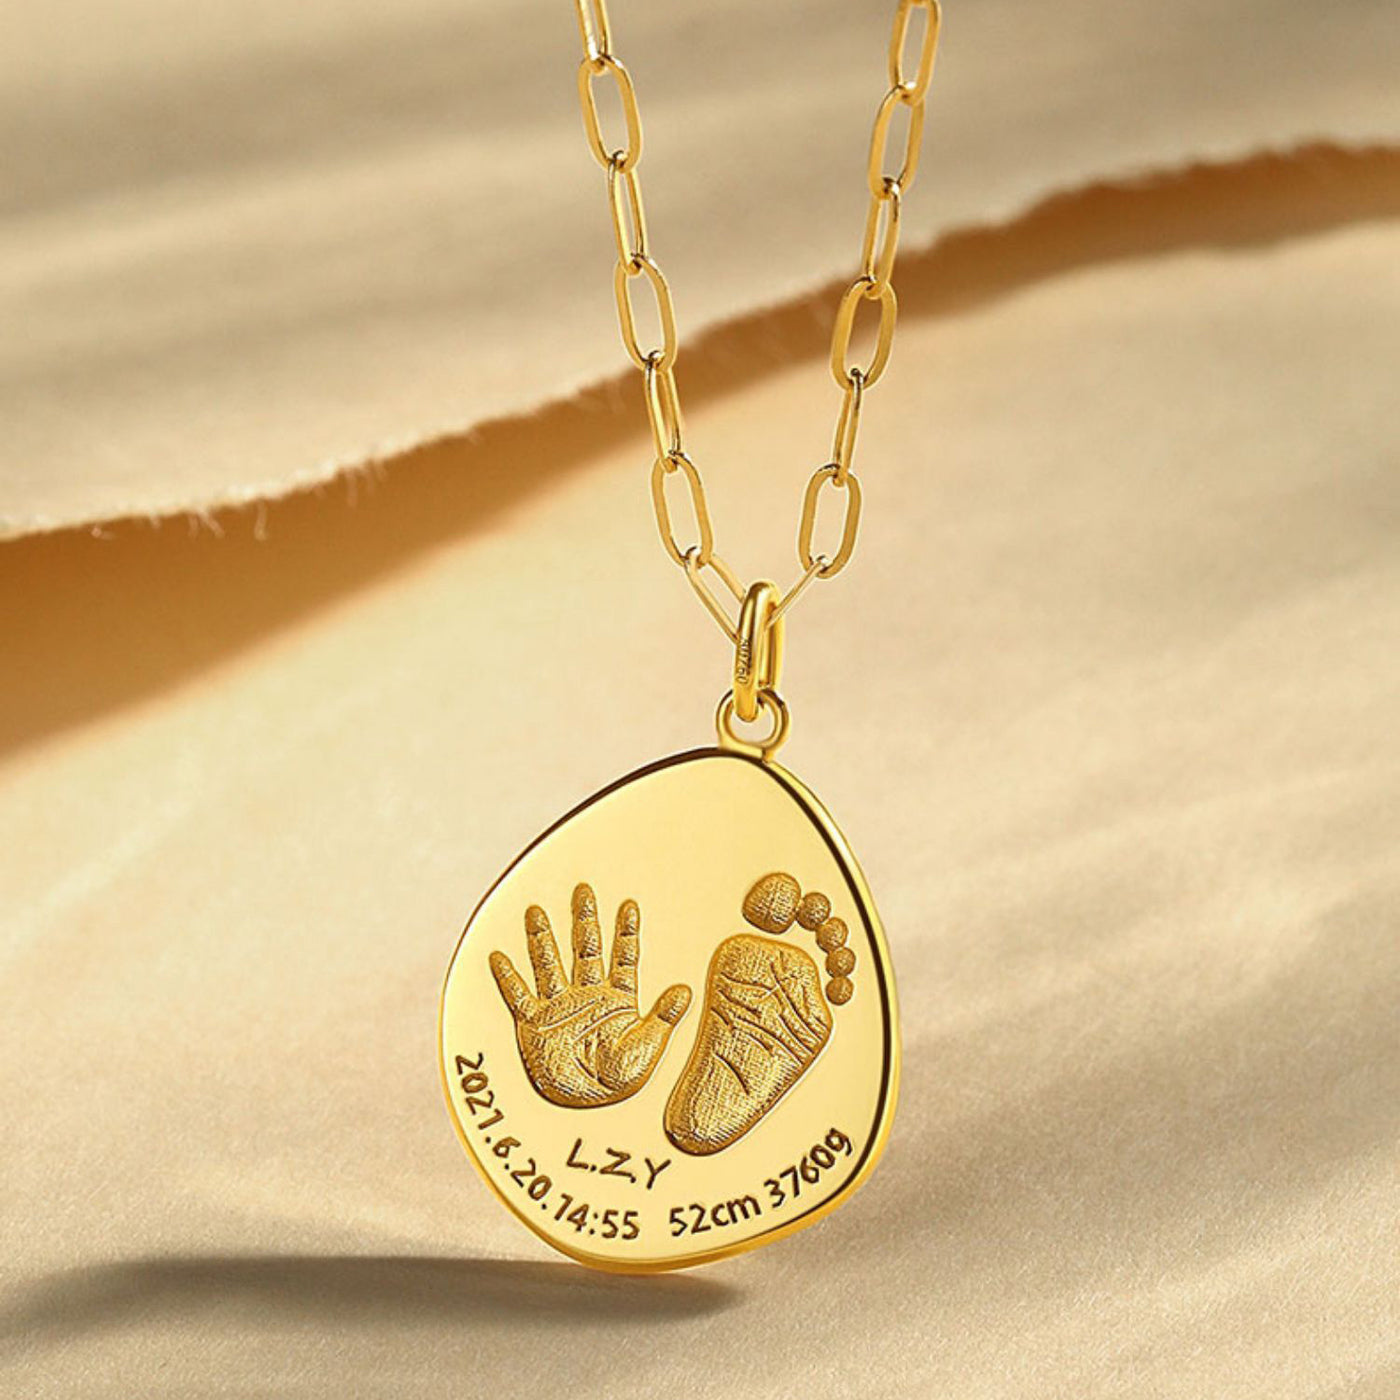 Personalised Silver Fingerprint Charm Necklace By Button and Bean |  notonthehighstreet.com